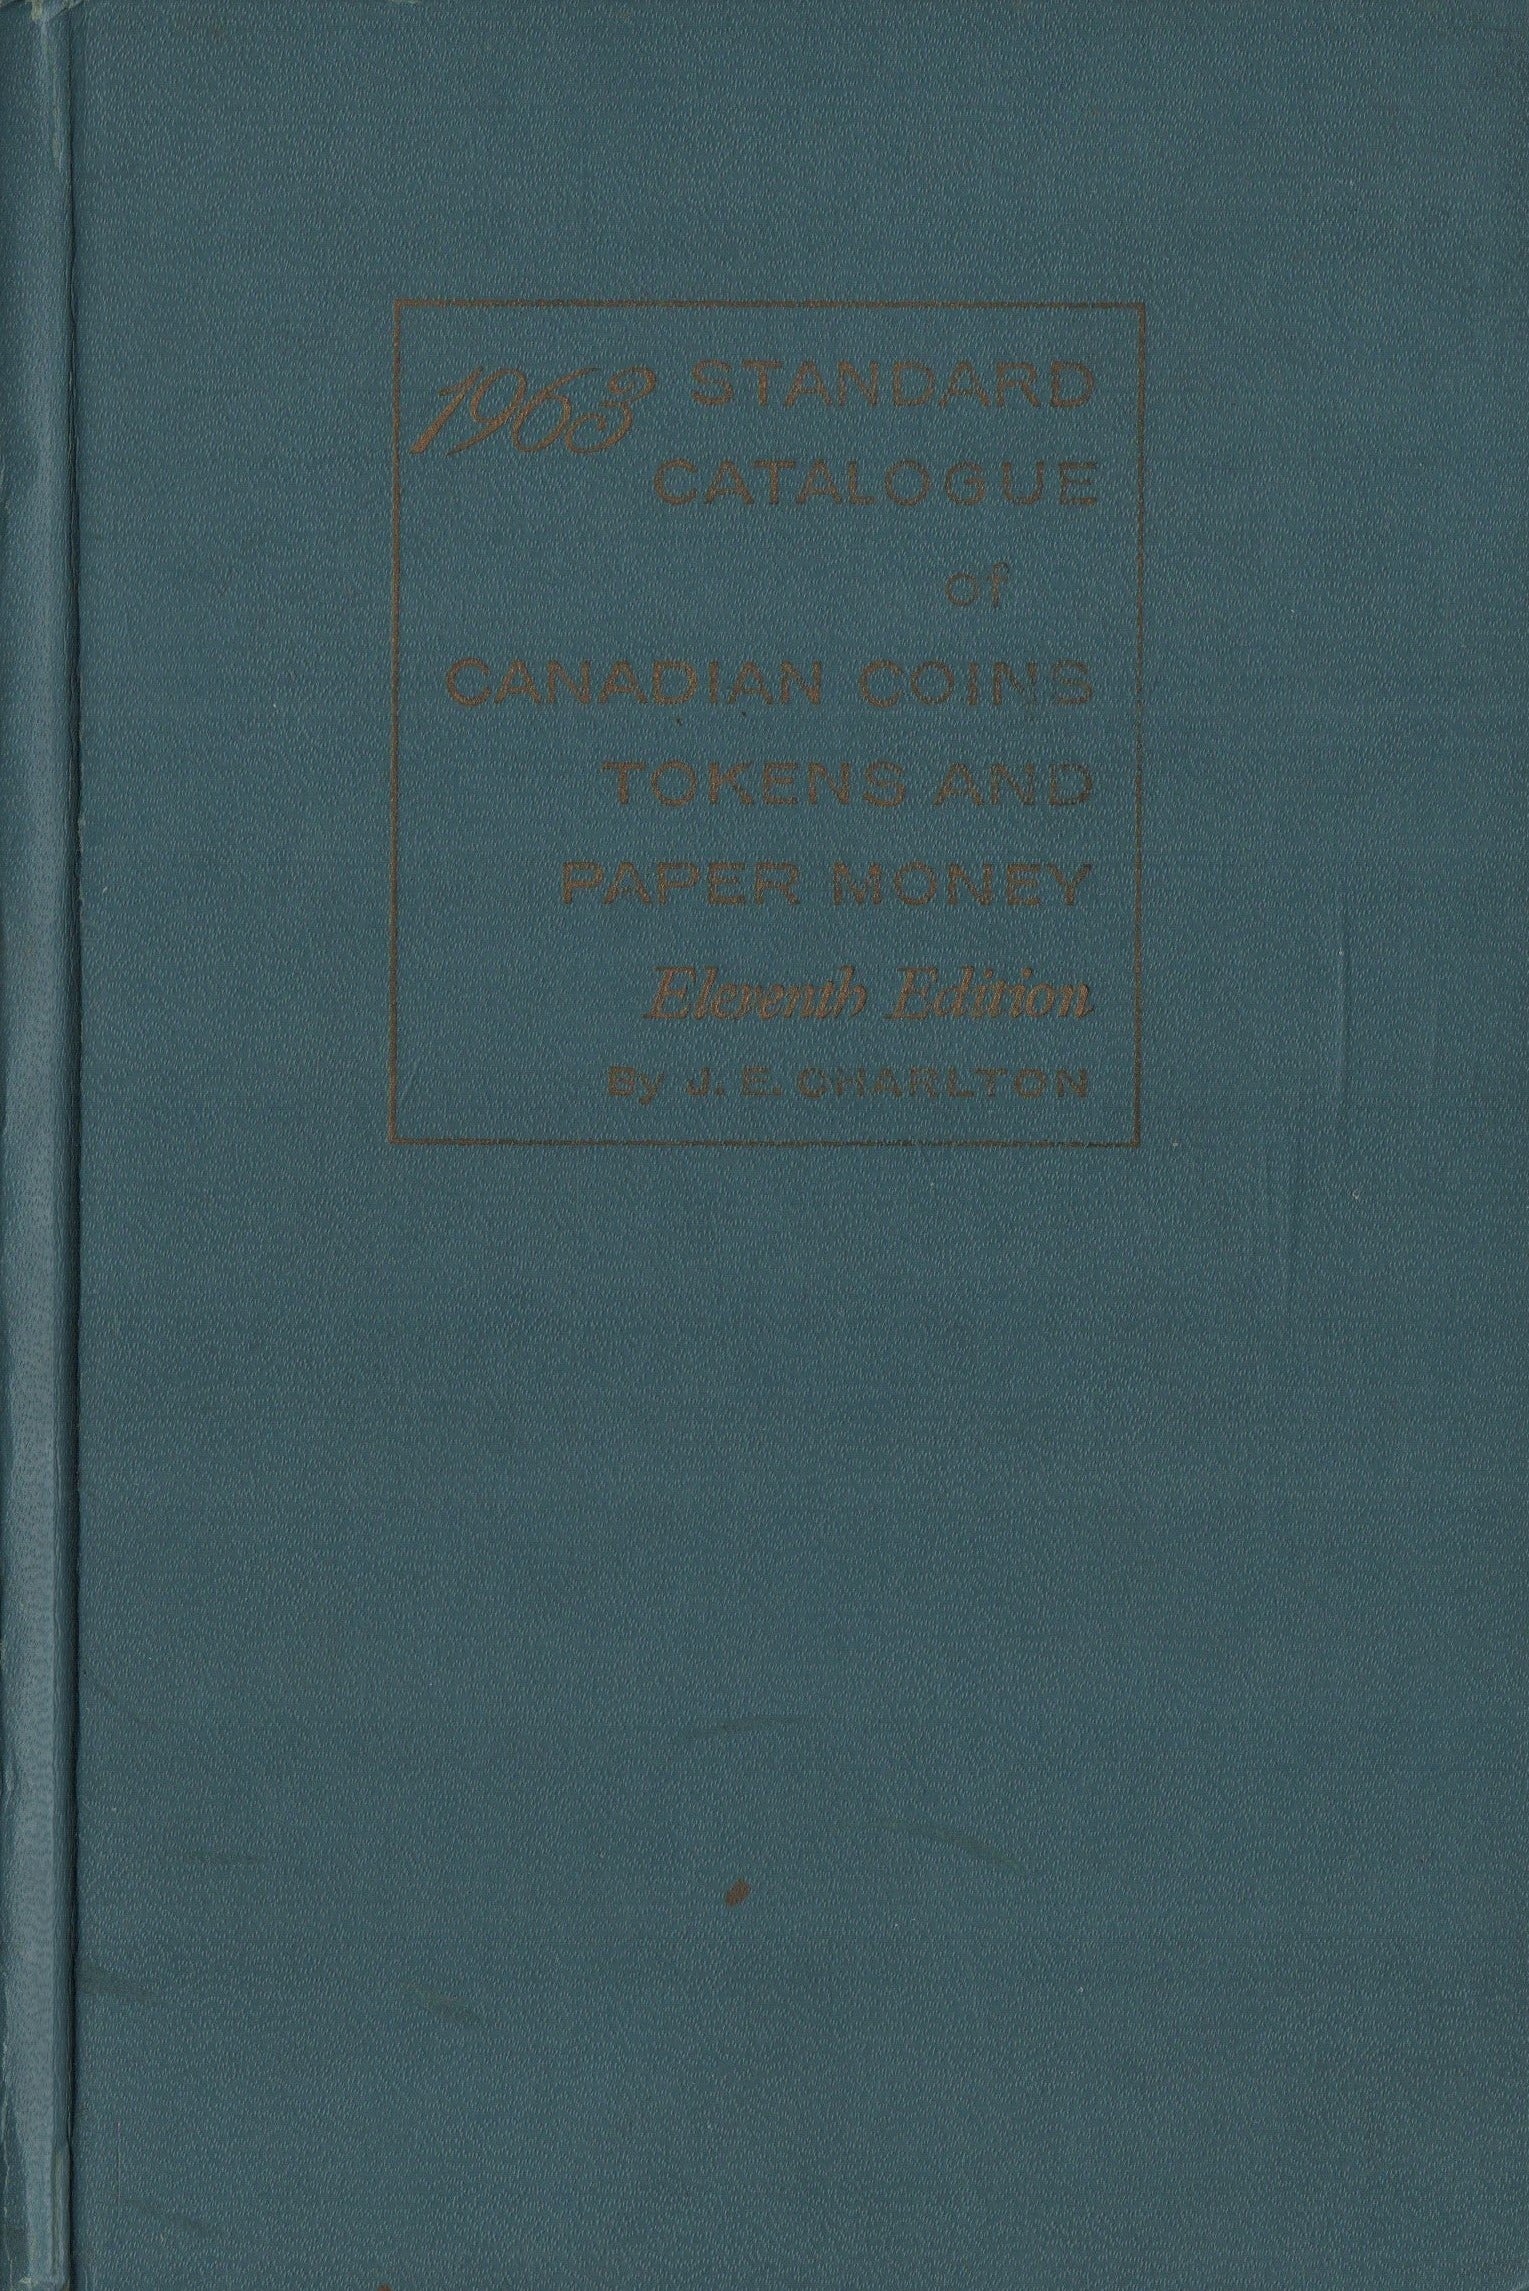 CHARLTON, J. E. 1963 Standard Catalogue of Canadian Coins Tokens and Paper money - Fully Illustrated 1670 to Date